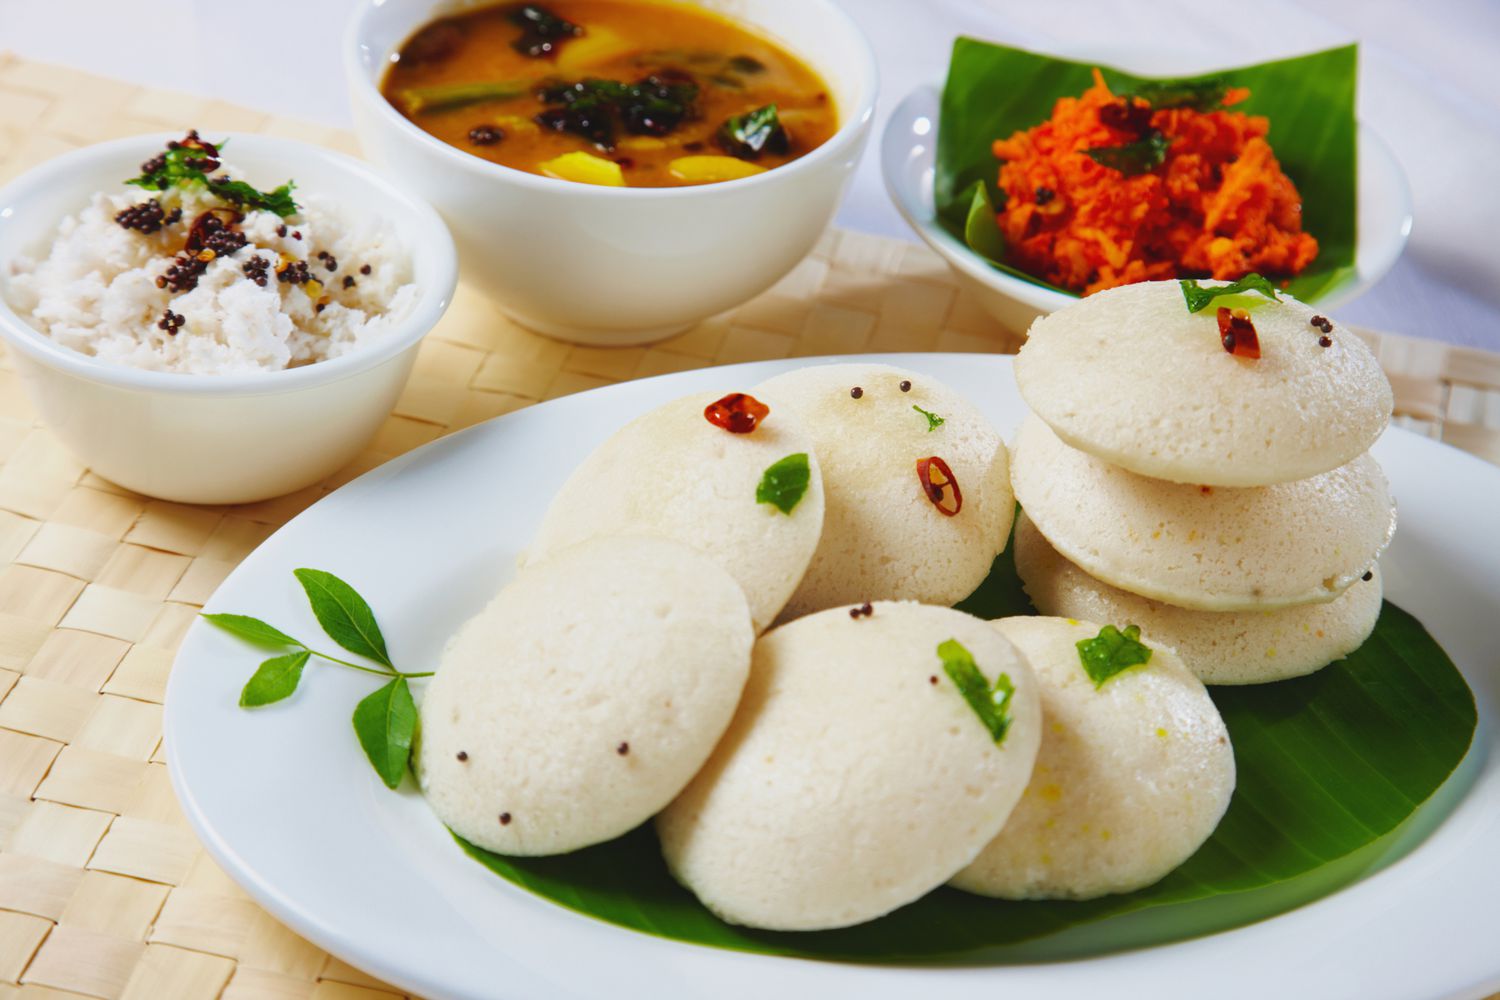 Homemade South Indian Idli - Steamed Rice Cakes